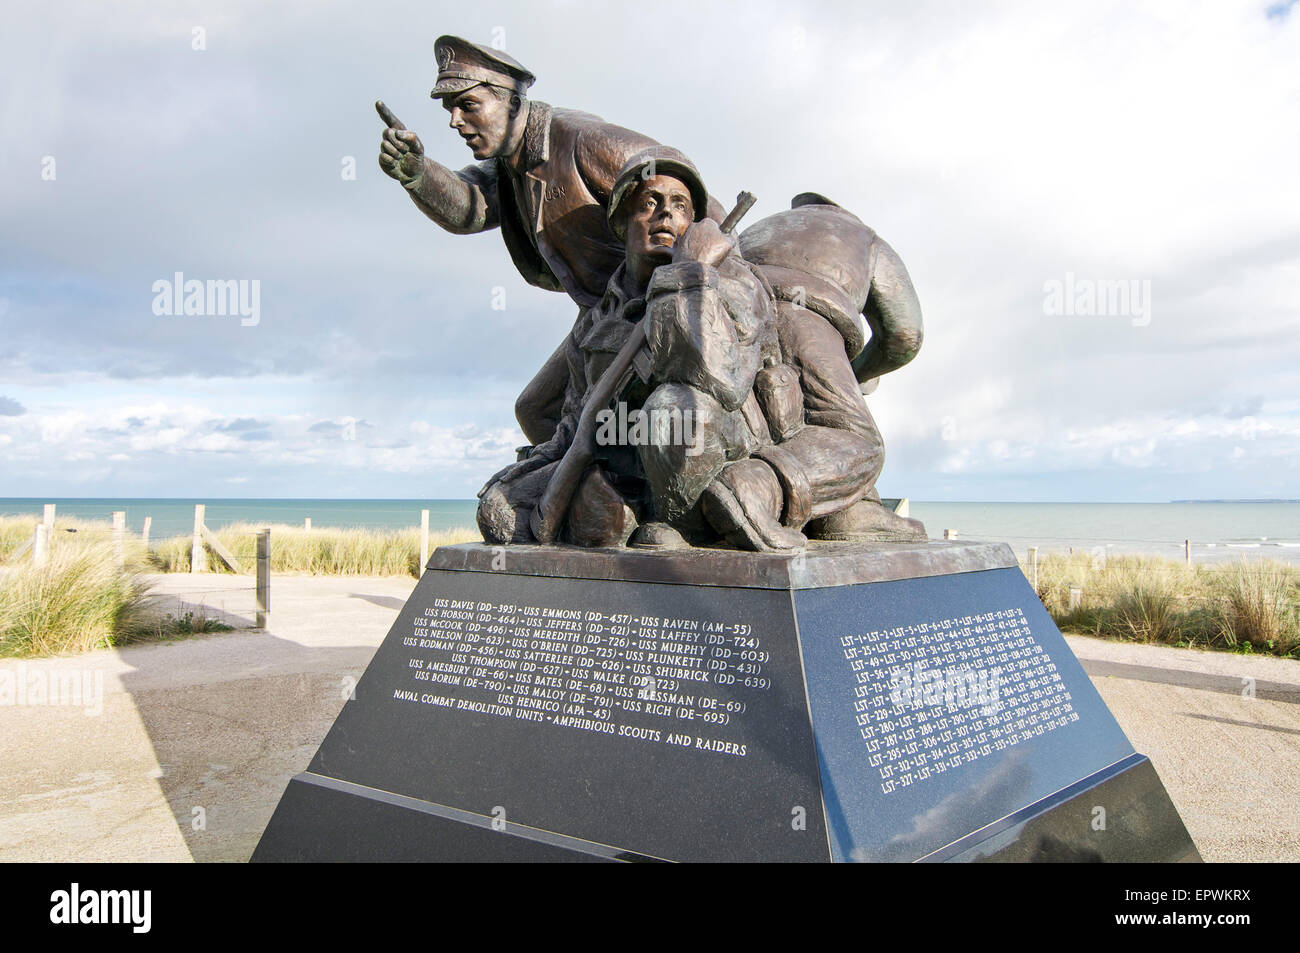 U.S. Navy Monument facing the sea at Utah Beach in Normandy, France. This beach was one of the D-Day landing sites in WWII. Stock Photo